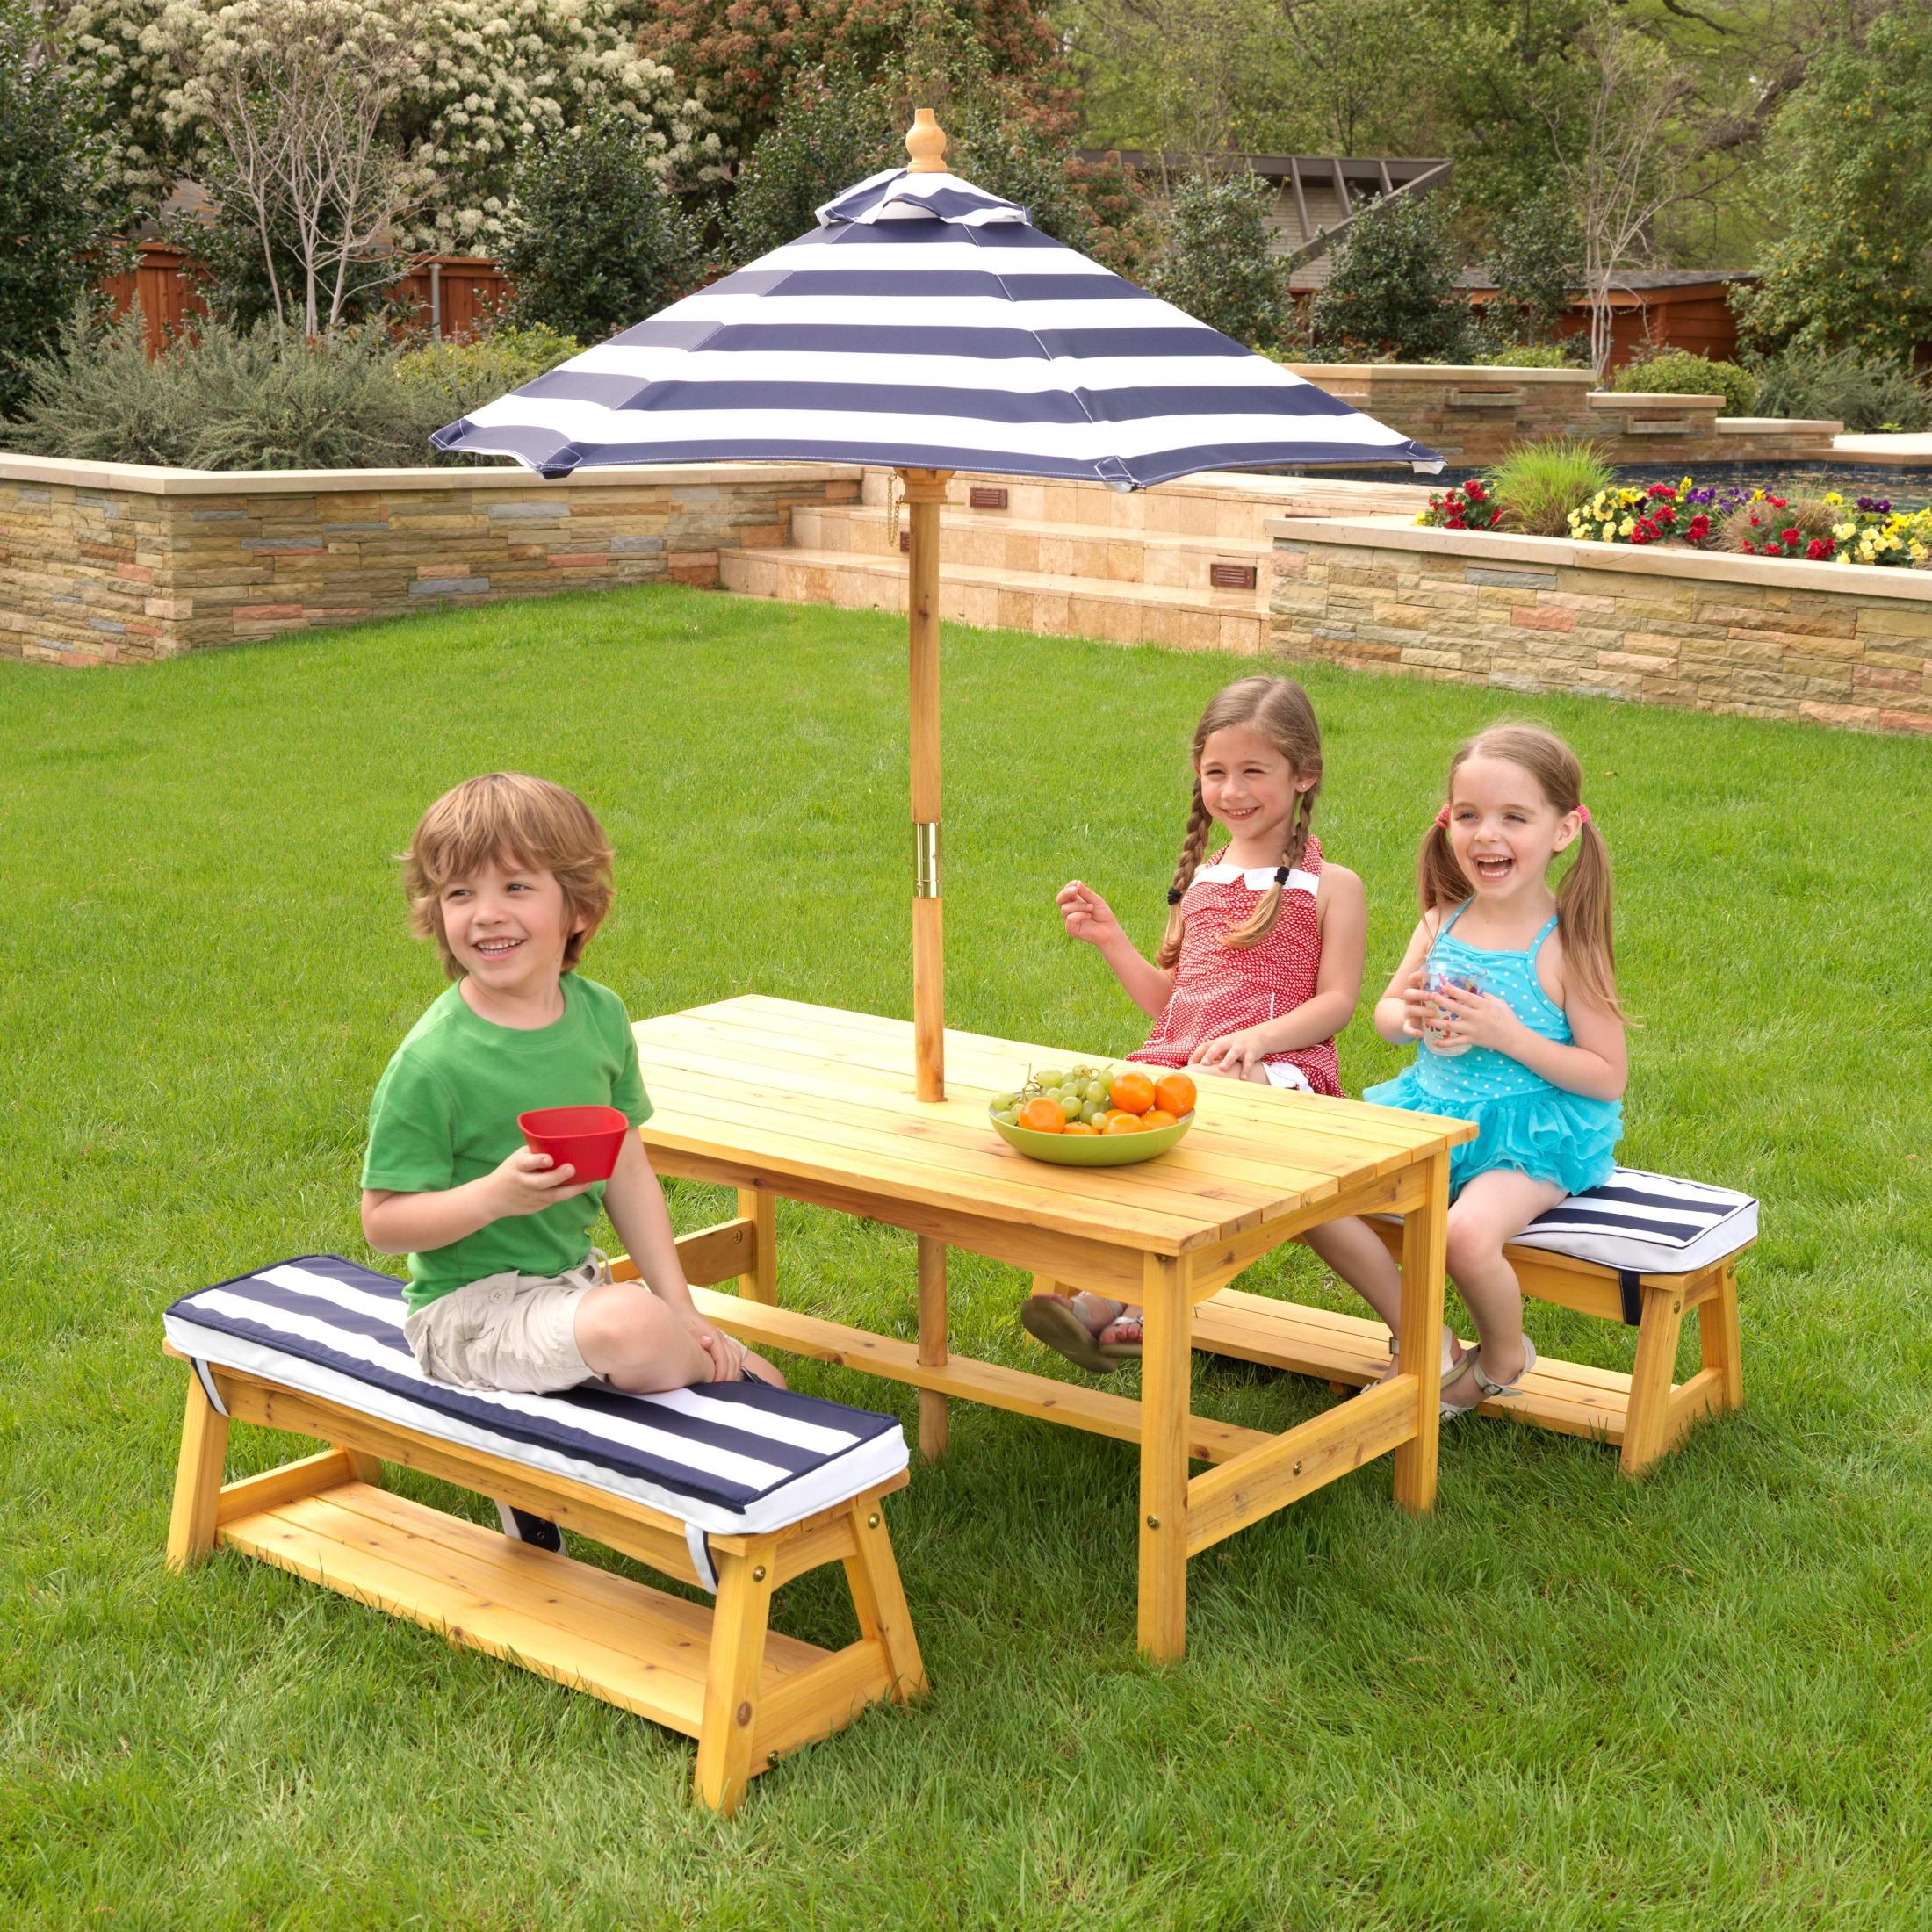 KidKraft 46" Navy and White Striped Outdoor Wooden Table & Bench Set